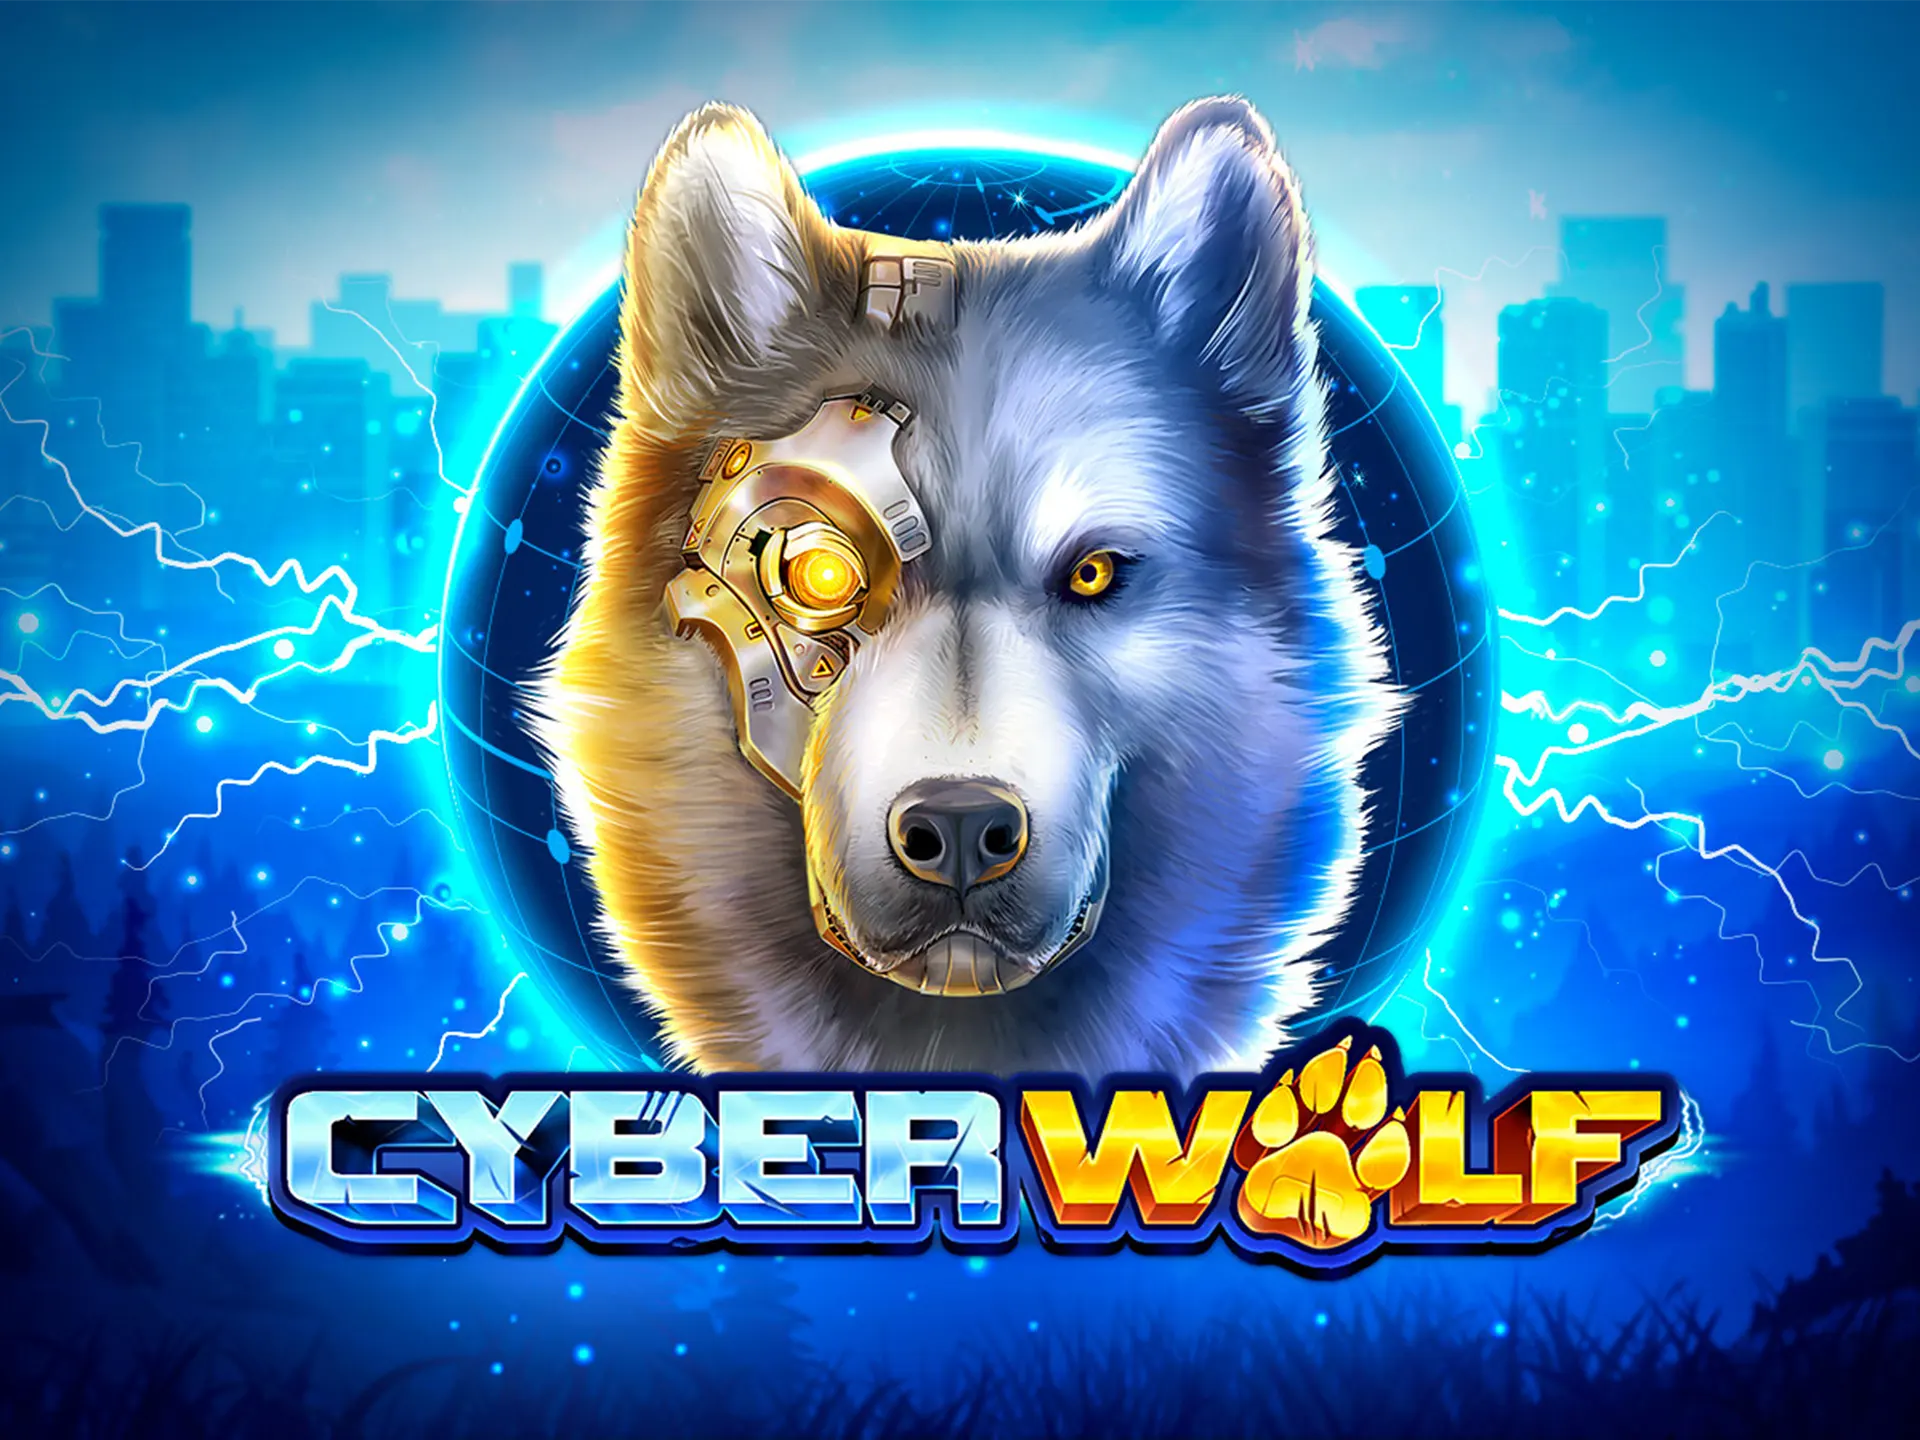 Spin Cyberwolf slots and win money.